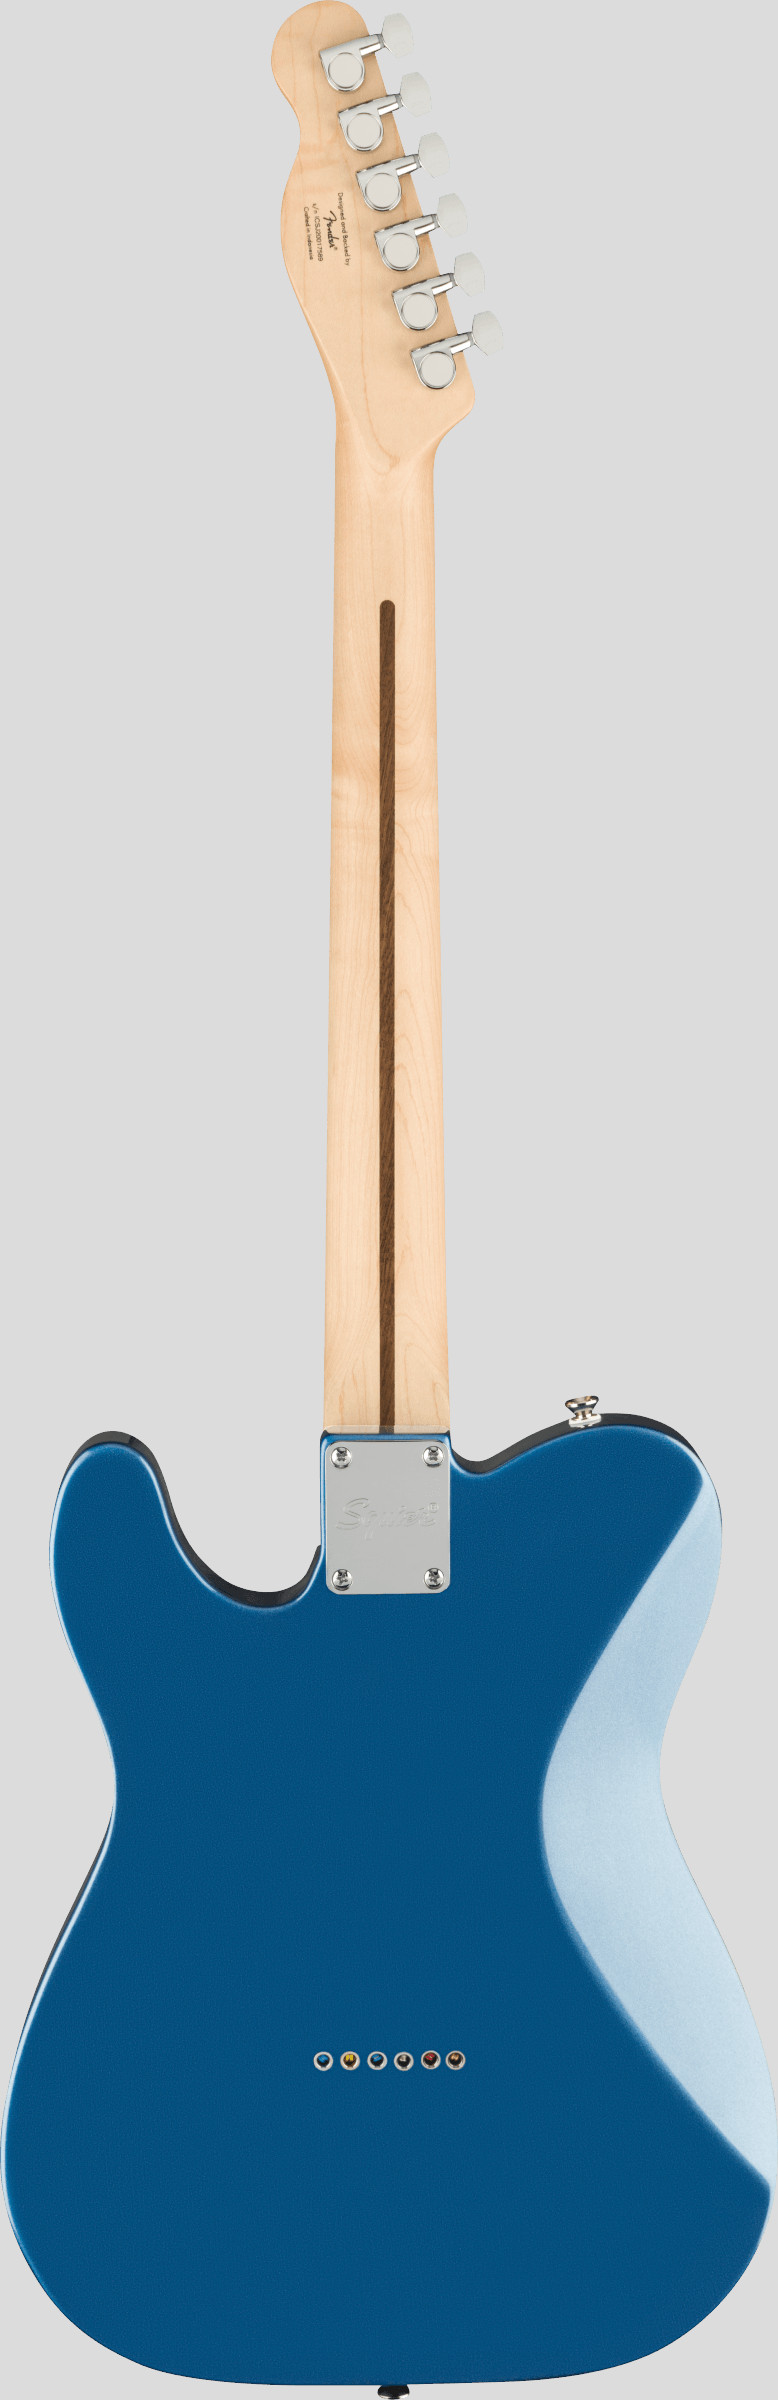 Squier by Fender Affinity Telecaster Lake Placid Blue 2